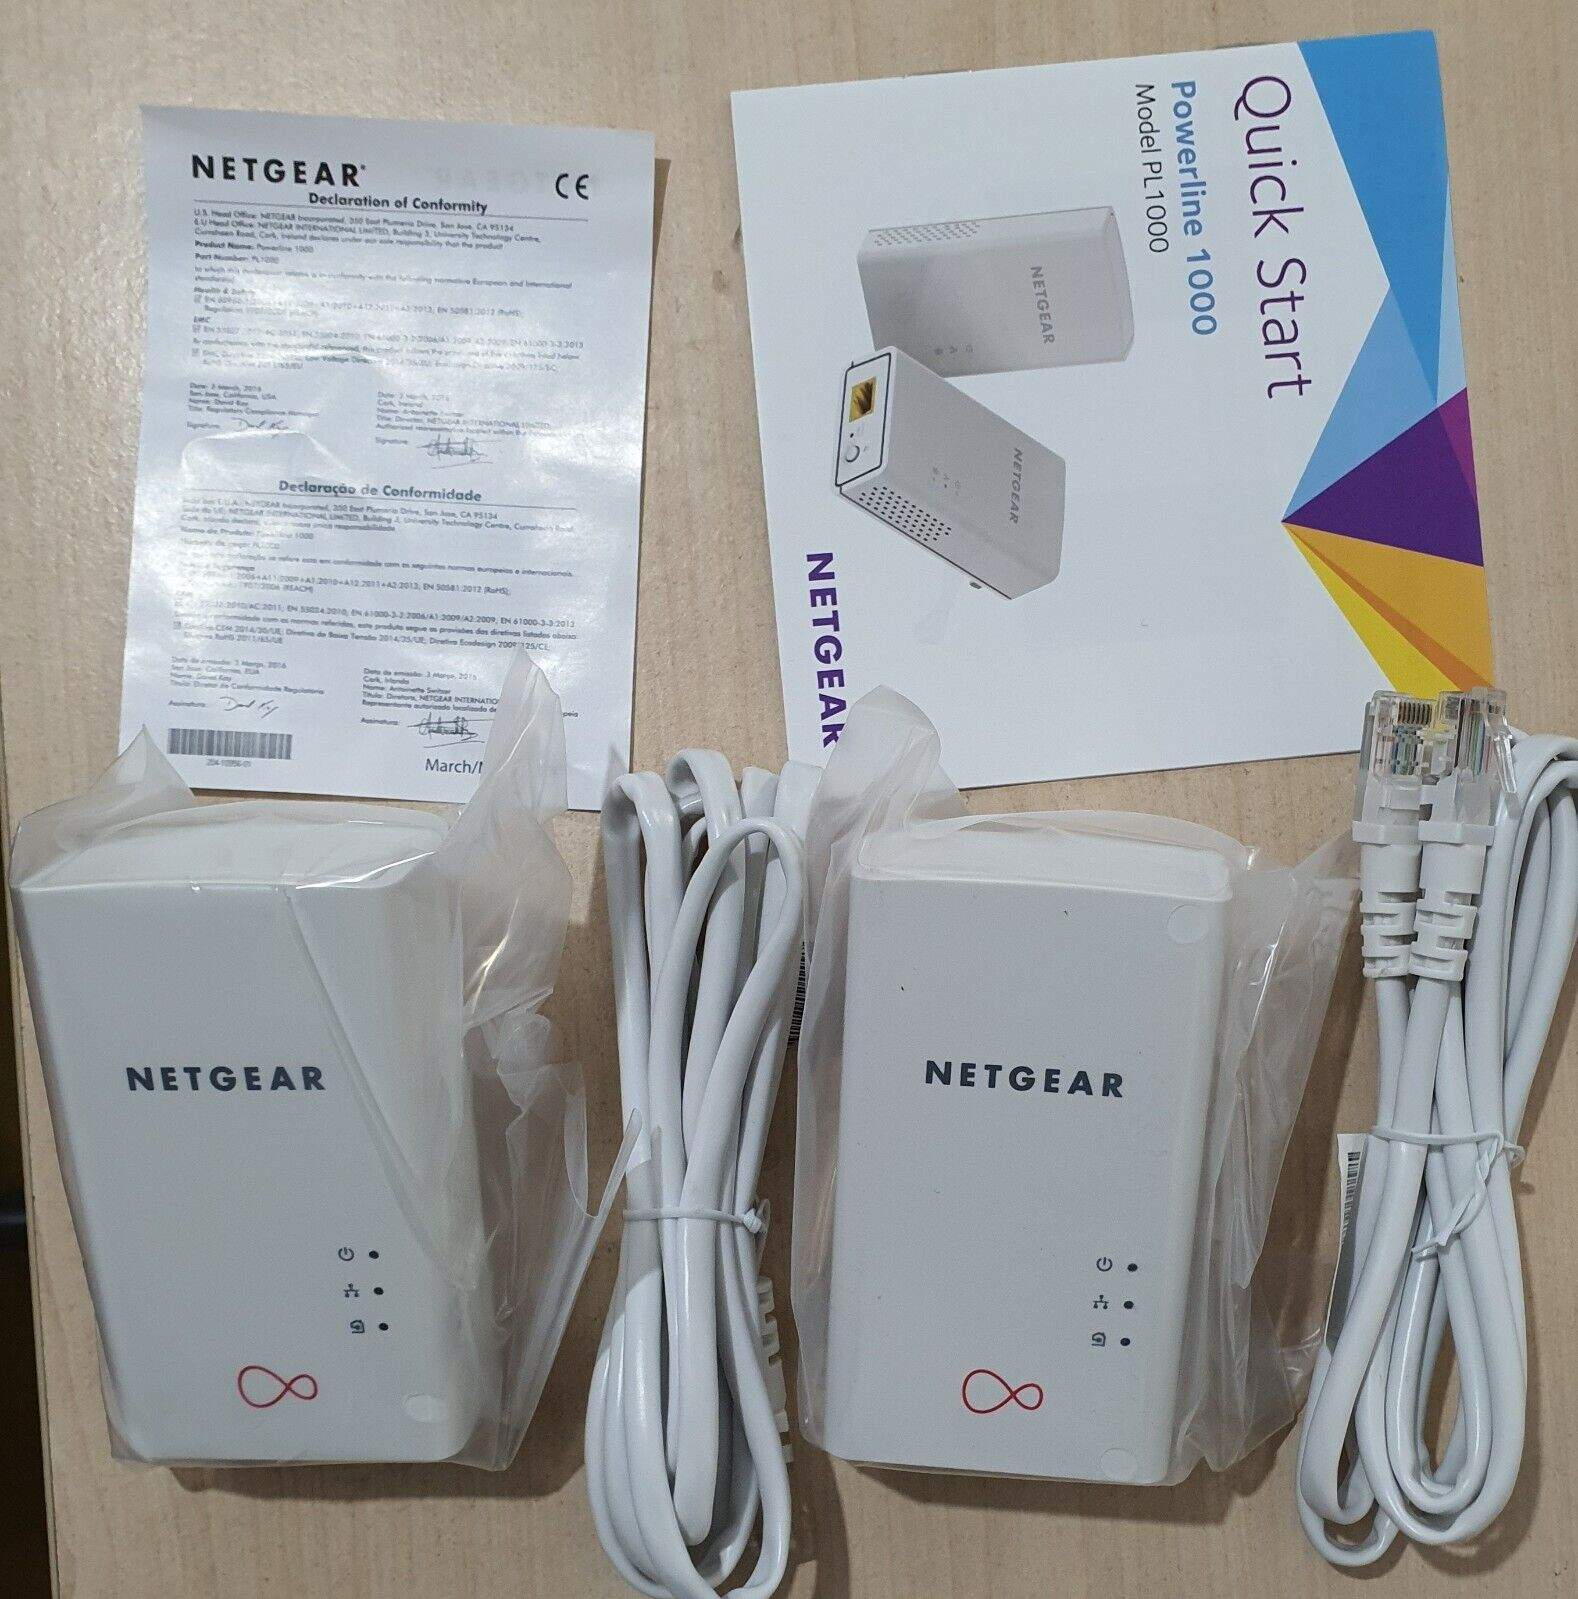 How to Get Netgear Powerline 1000 Mbps Speed?